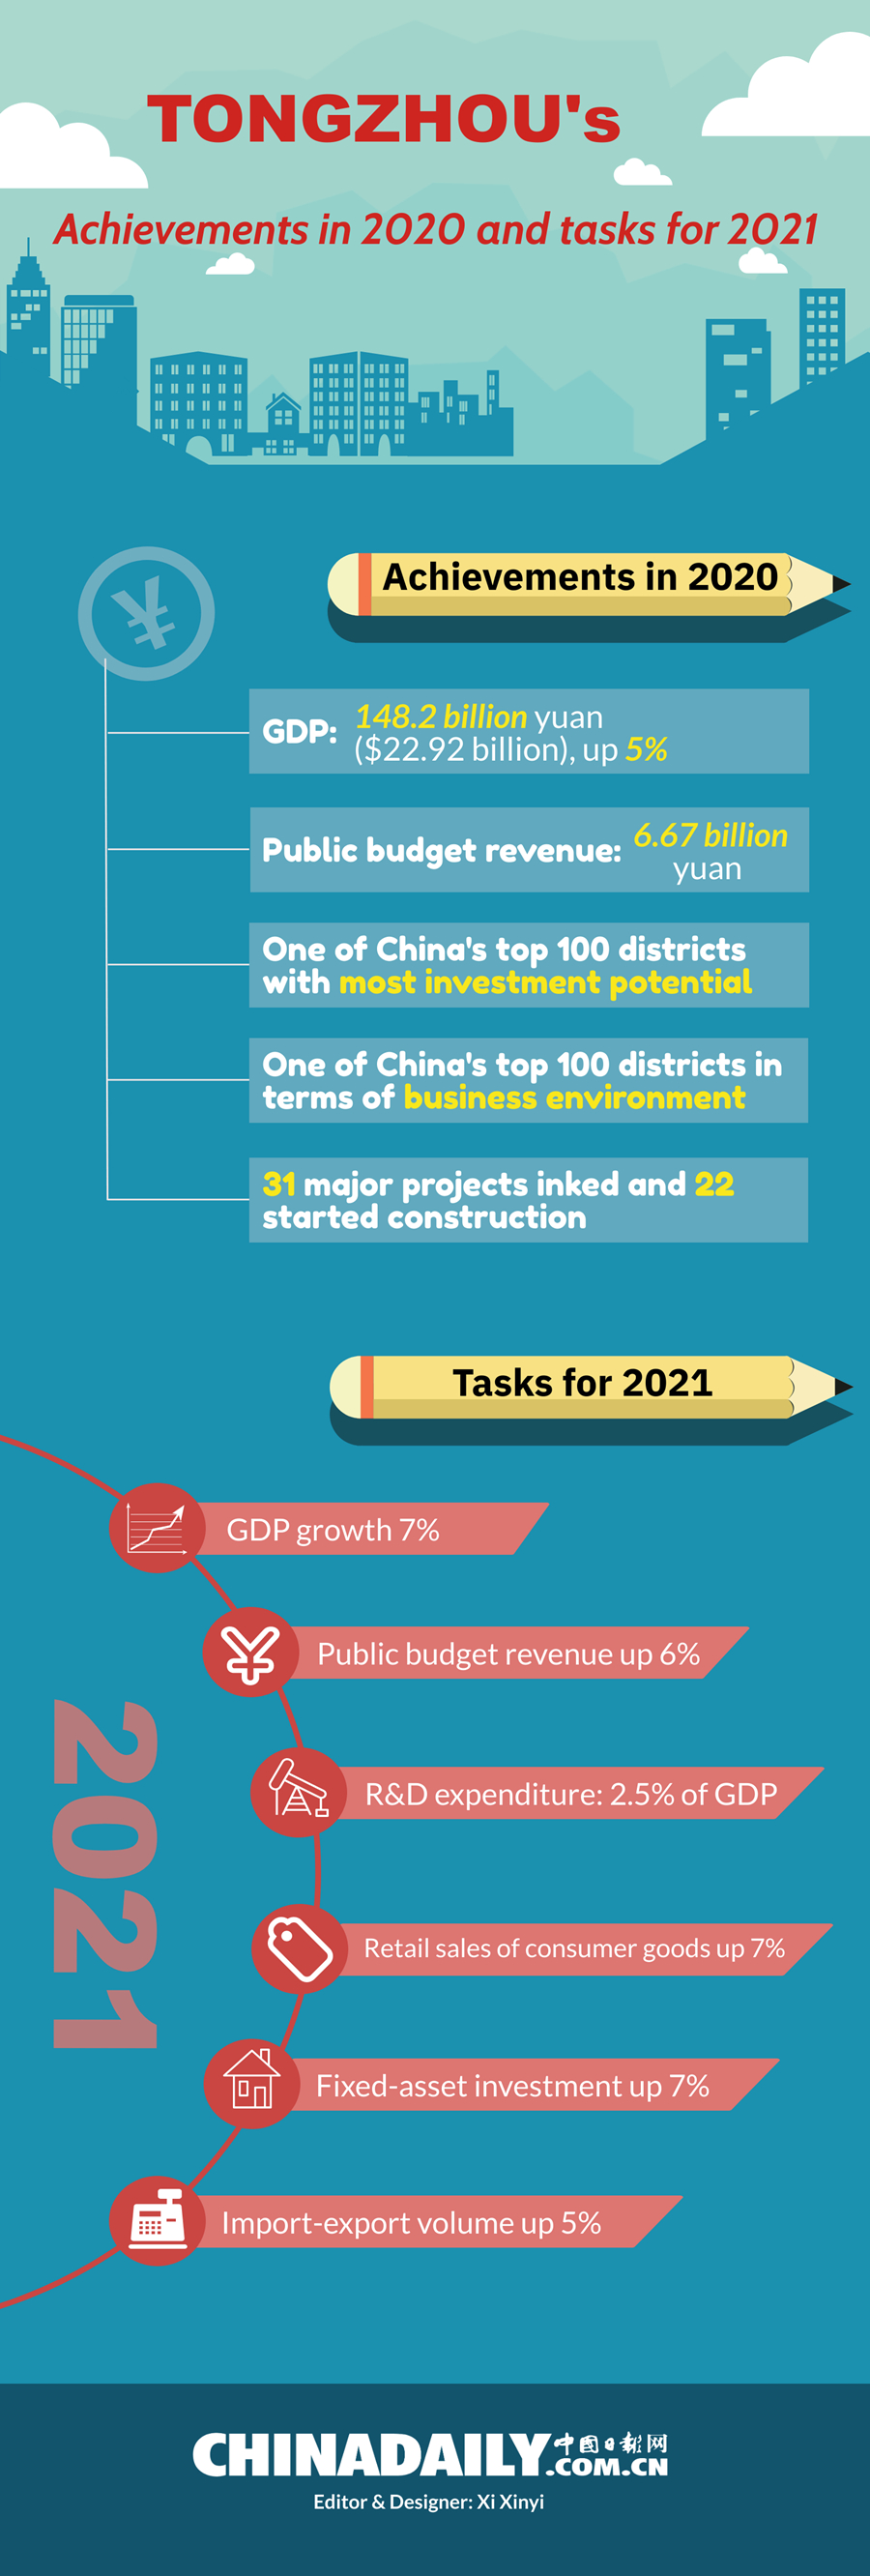 Tongzhou's achievements in 2020 and tasks for 2021.jpg